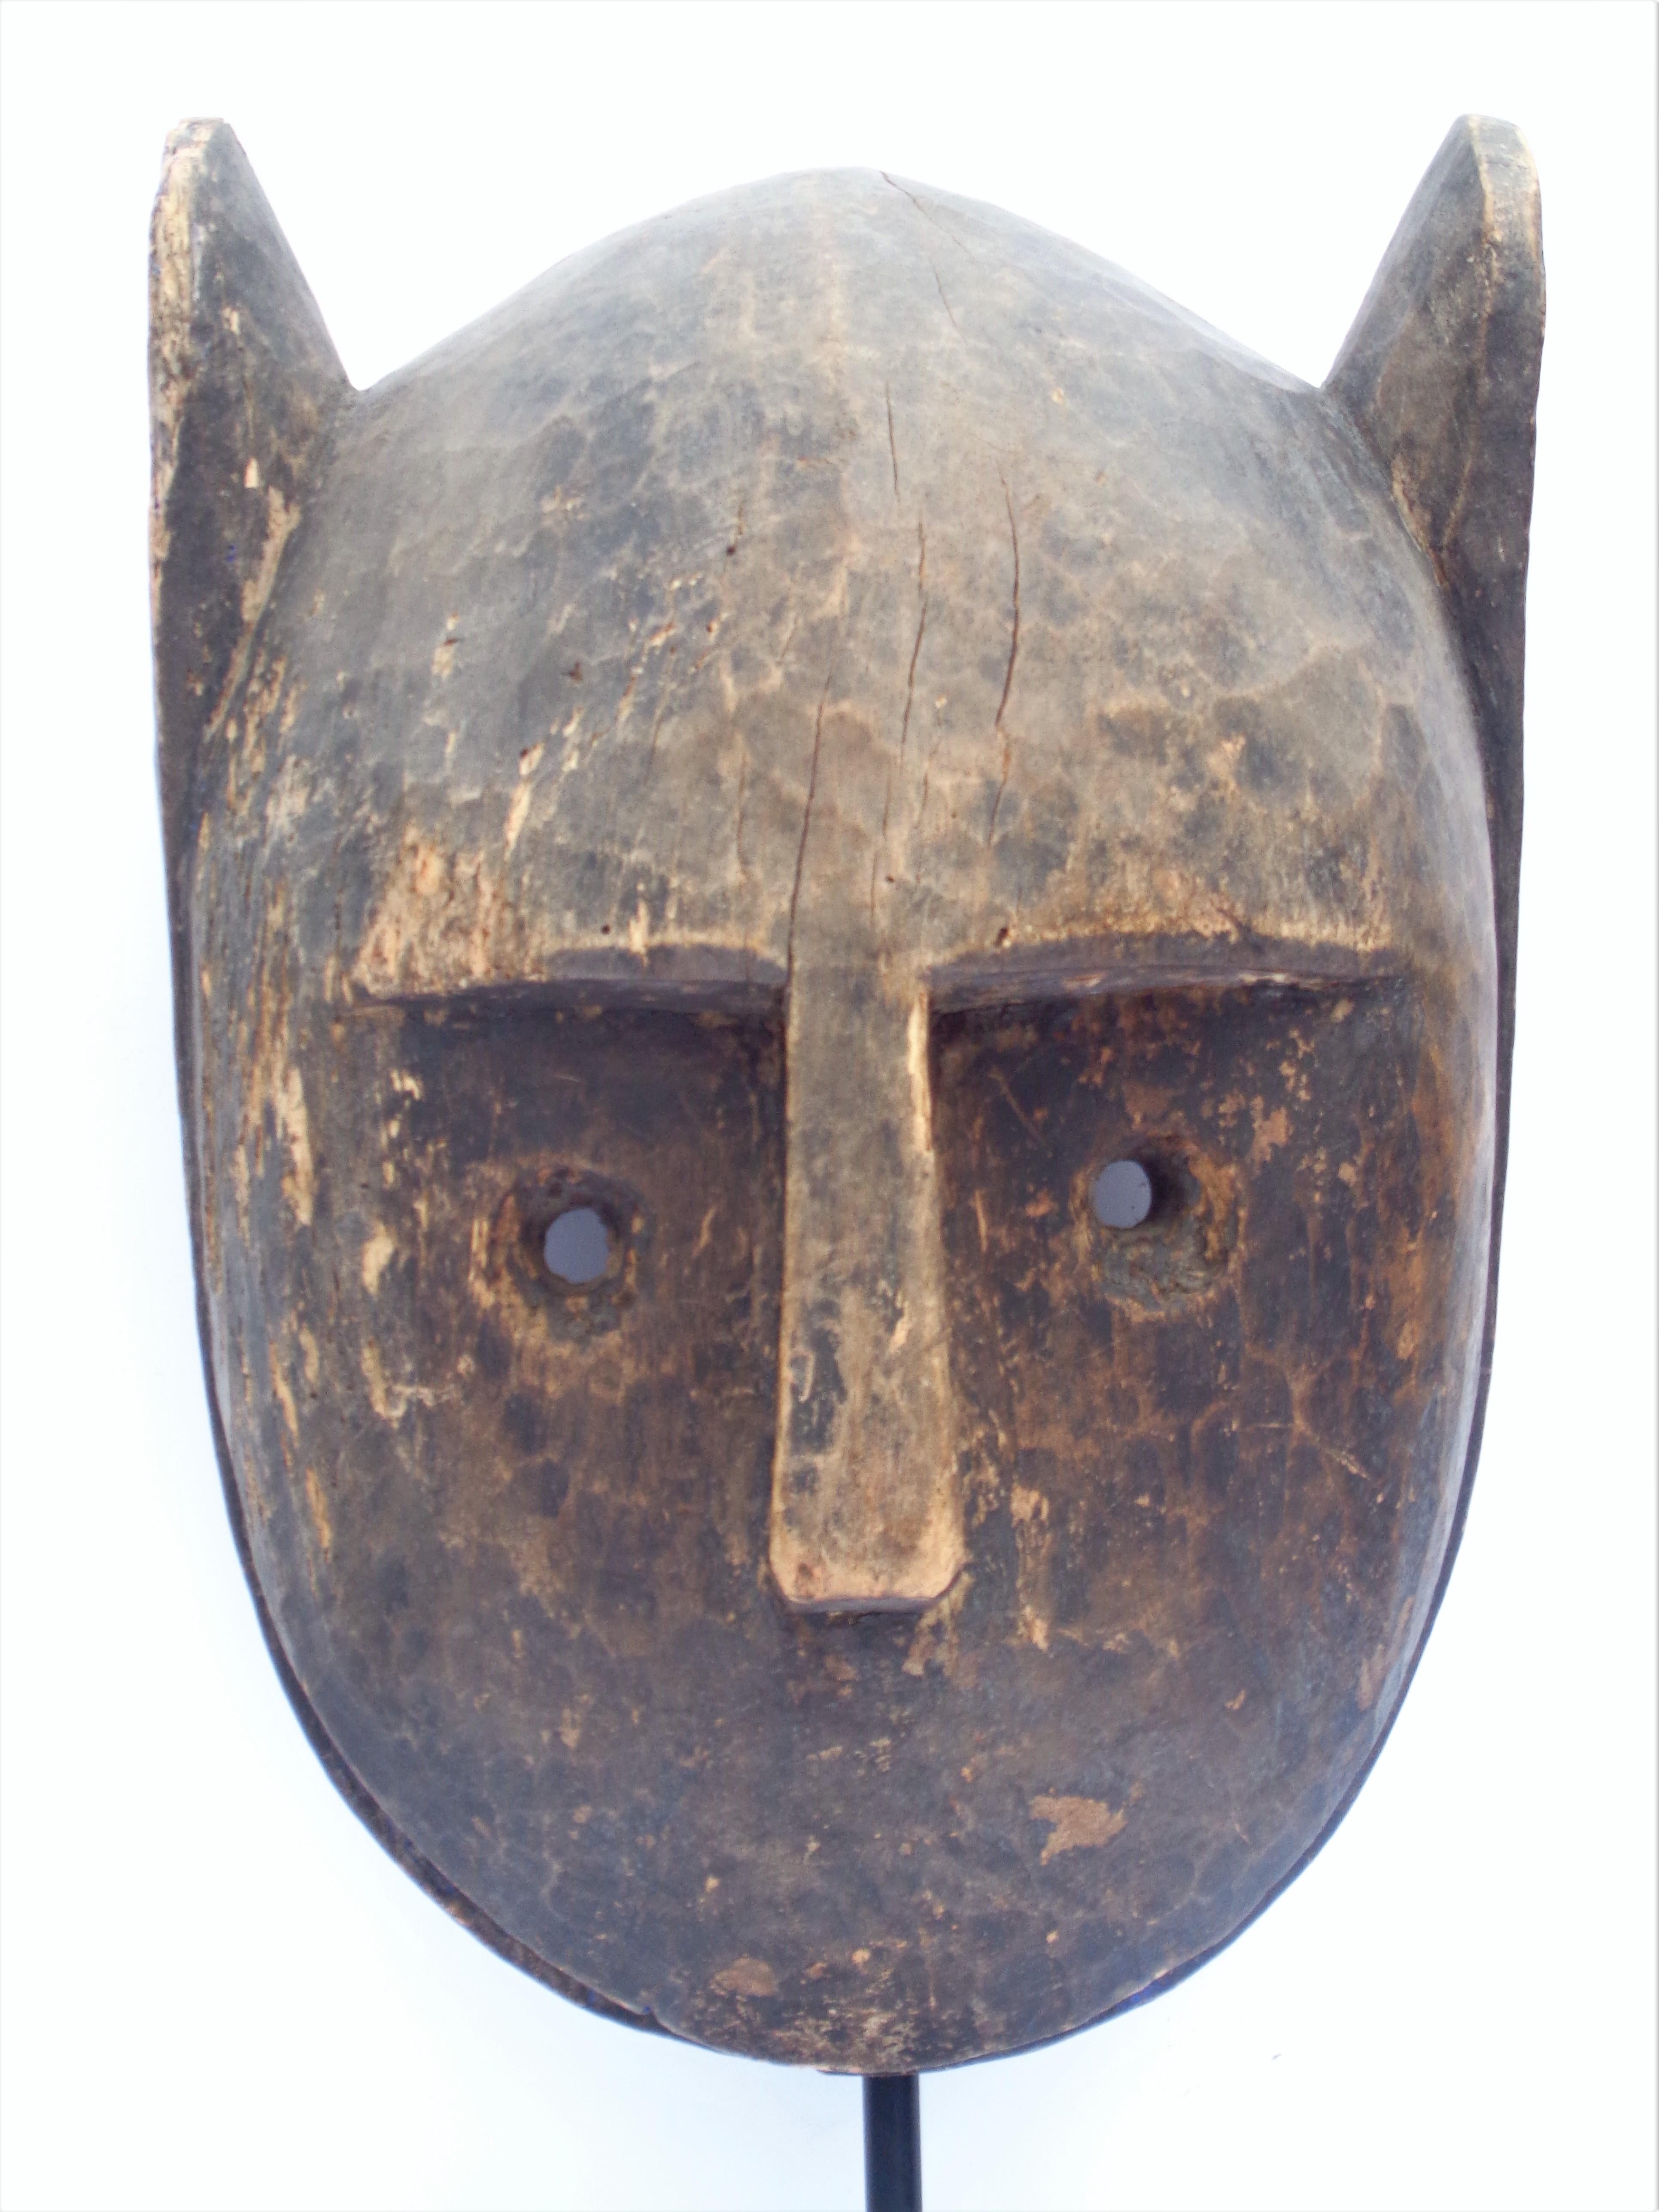 Bamana animal mask, Mali - representing a lion with short wide ears and open toothy mouth. A simple form with great presence in beautifully aged original old surface color with genuine wear and some old insect damage. Mounted on a fine custom black